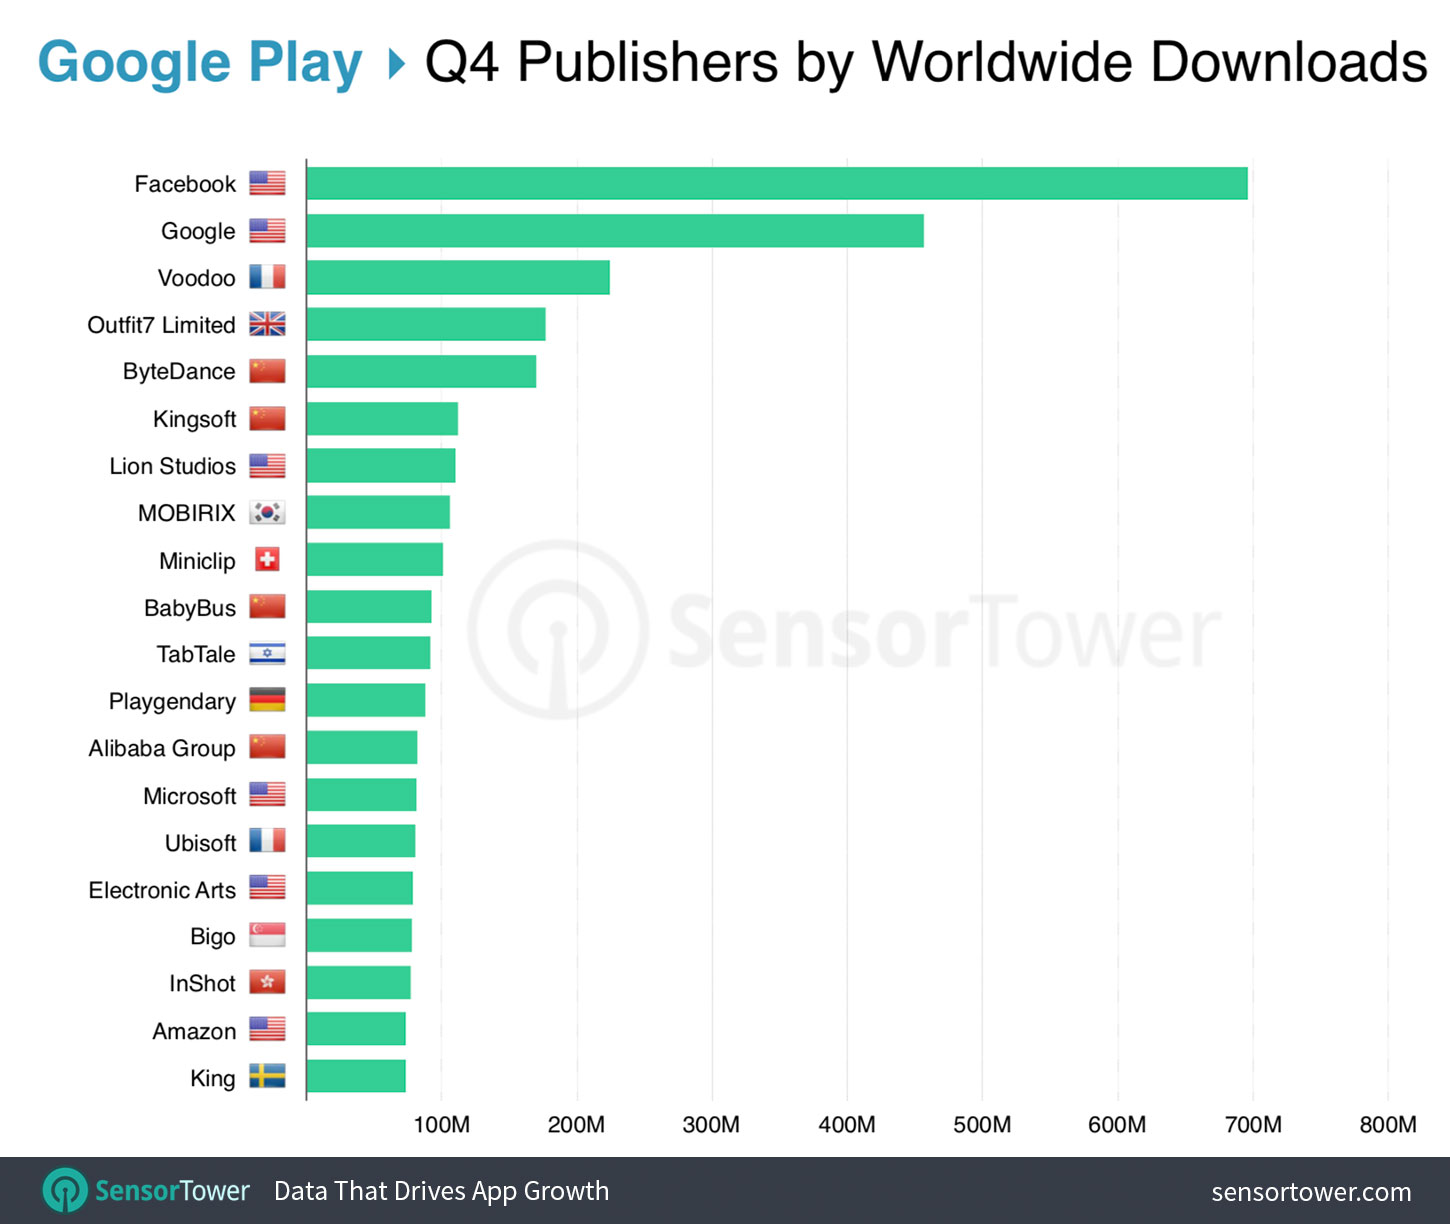 Top Google Play Publishers Worldwide for Q4 2018